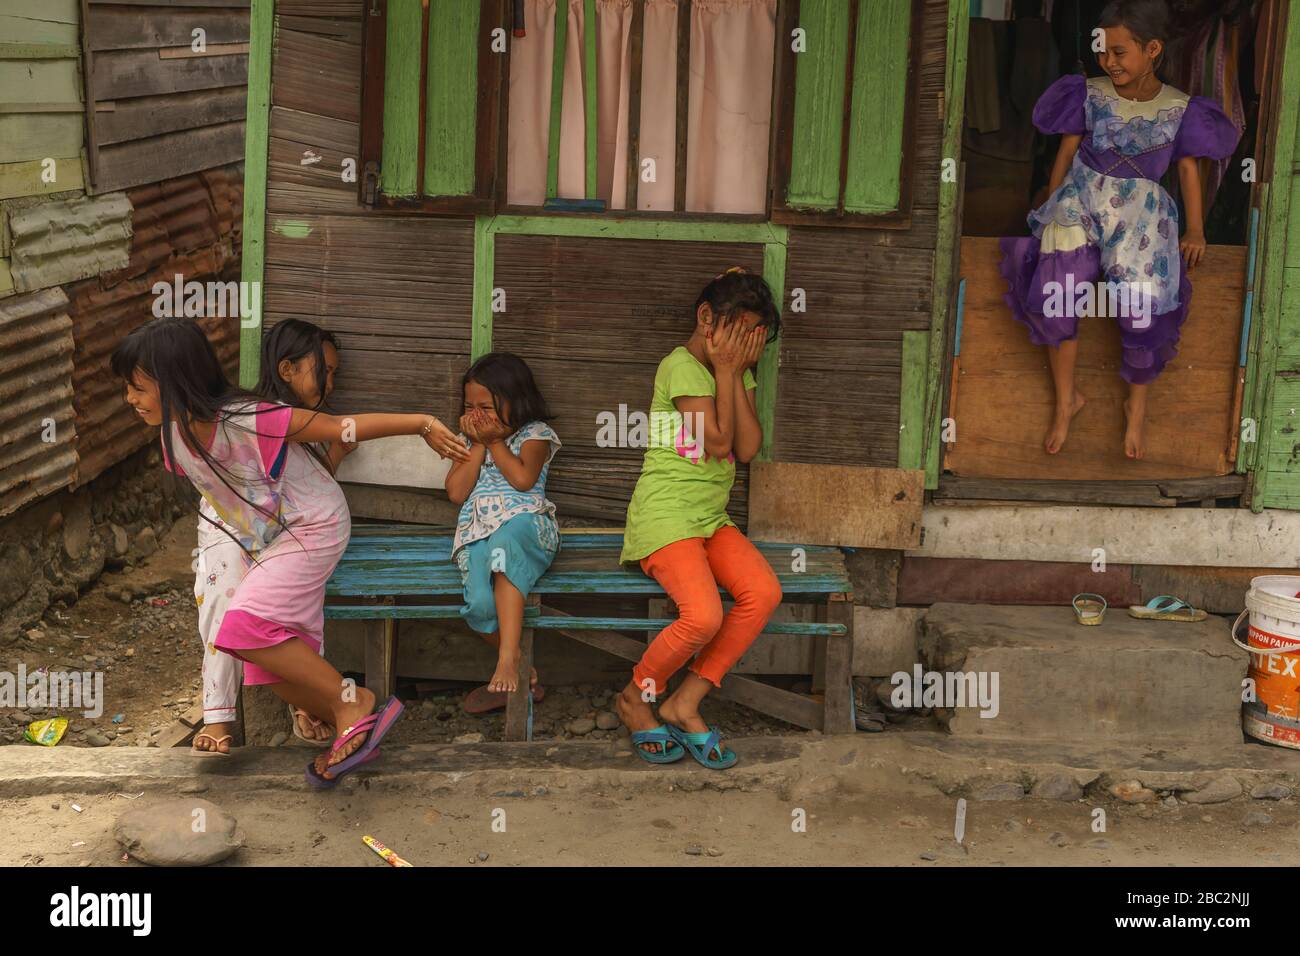 21 June 2018 Panyambungan,Sumatra, Indonesia:  Local small girls shy and excited of camera running away covering faces and laughing Stock Photo